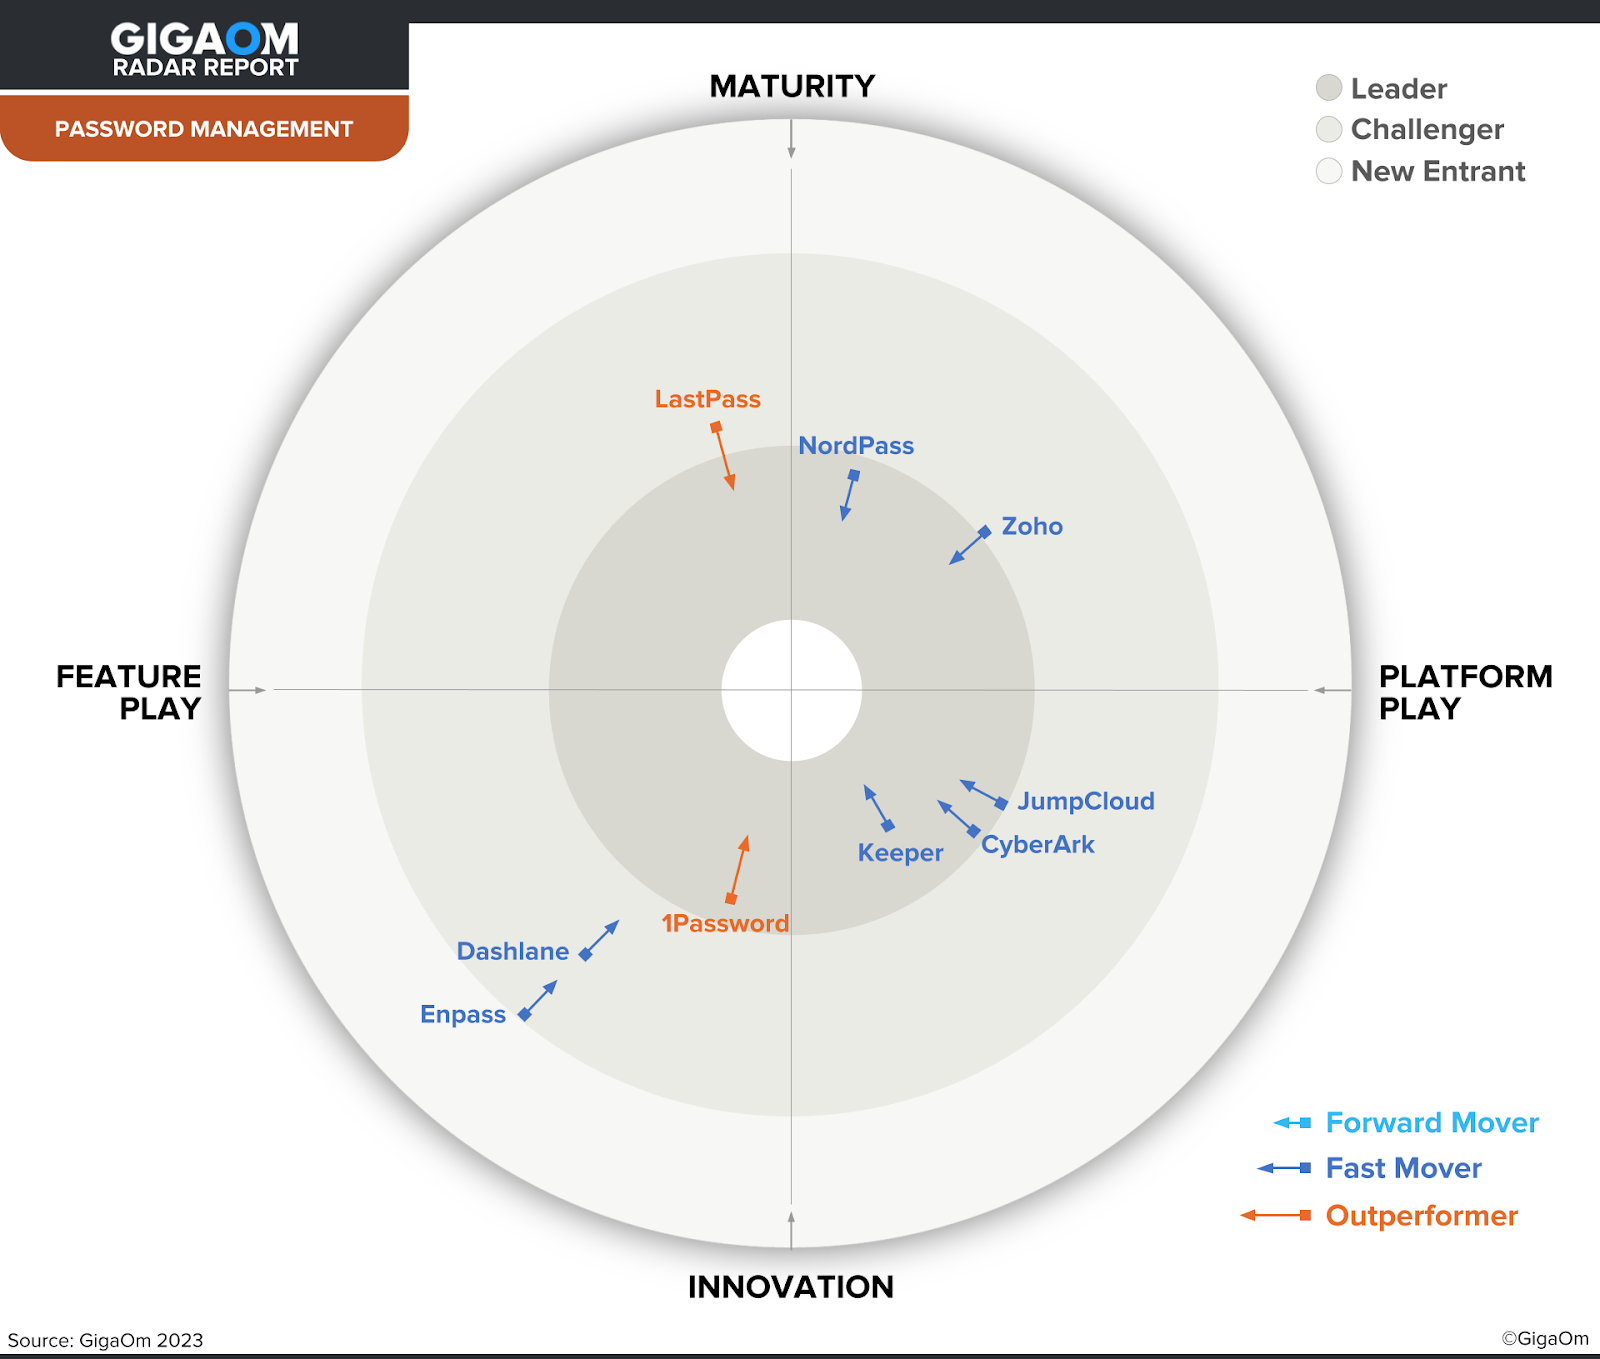 Image of GigaOm Radar Report showcasing Keeper Security as a leader in password management